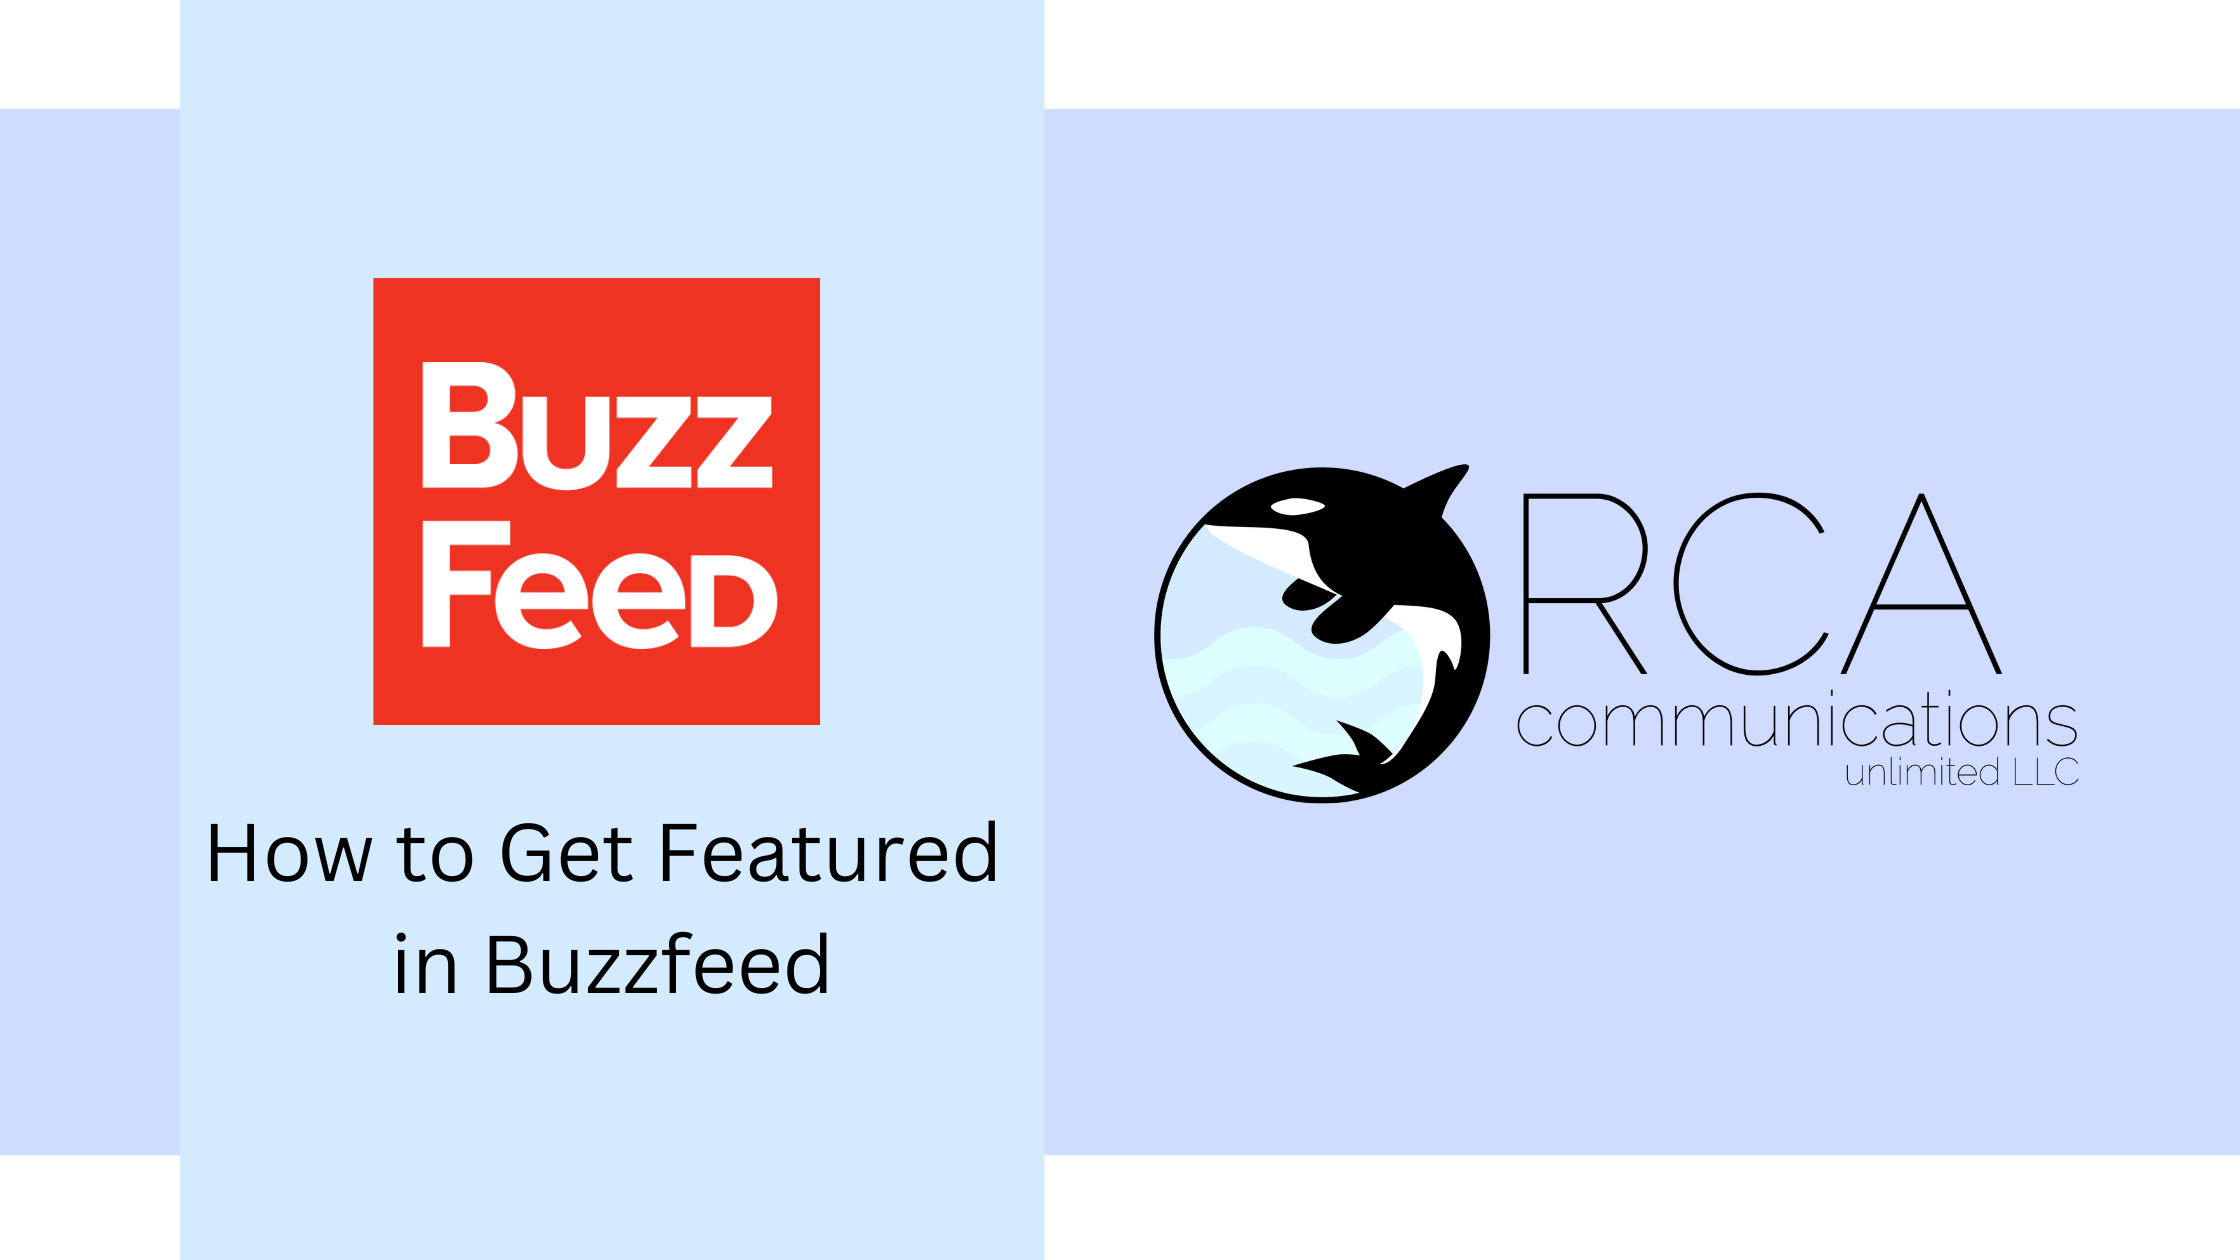 How to get featured in Buzzfeed